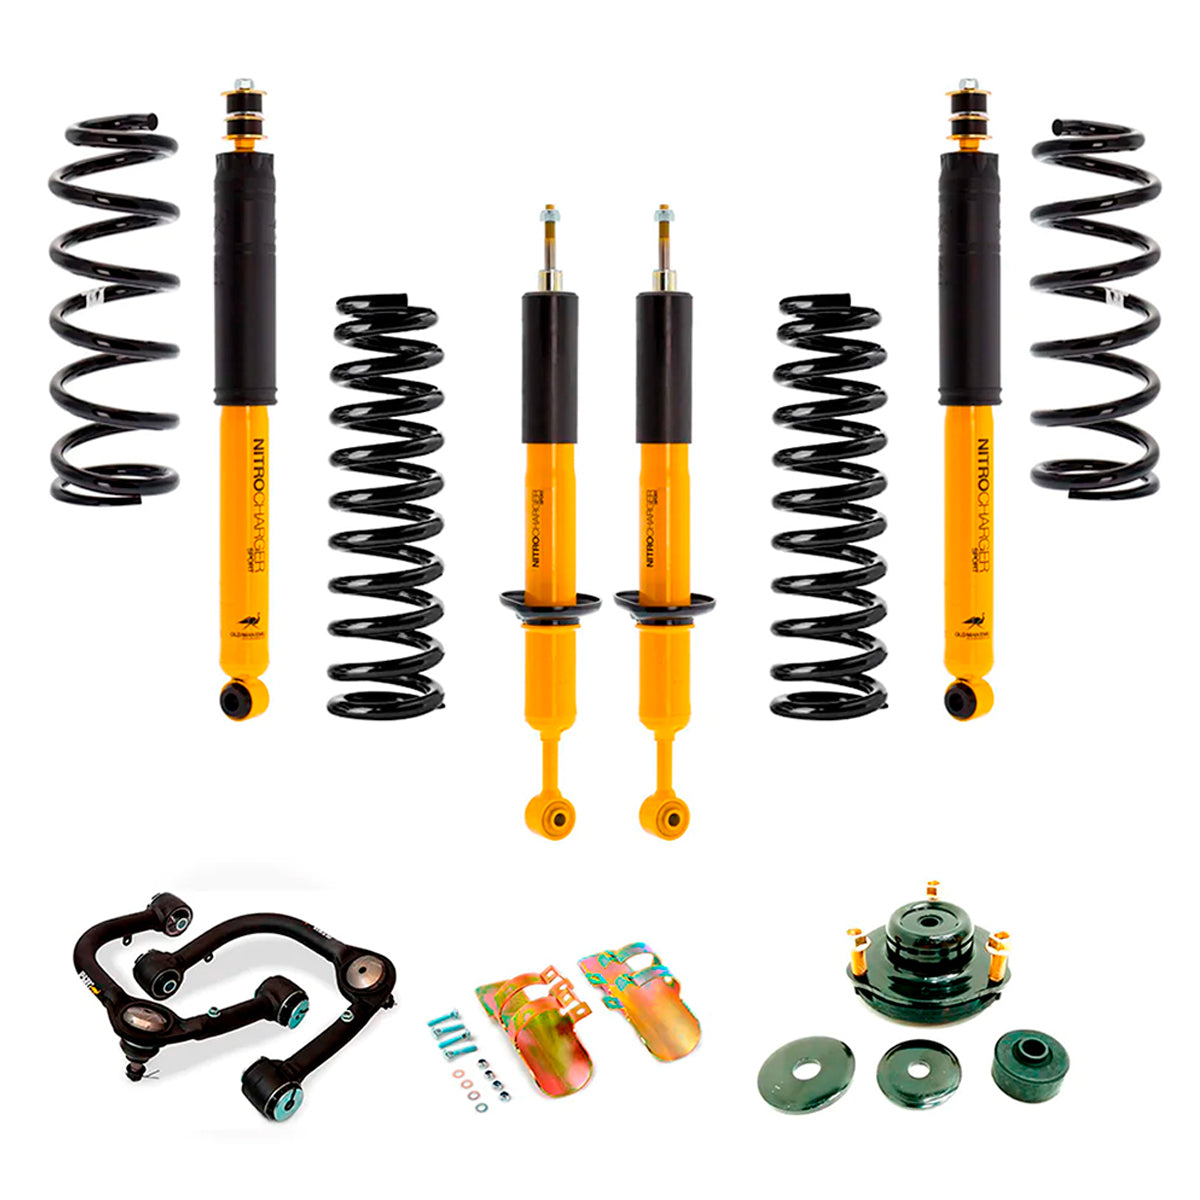 A OME 2 inch Lift Kit for 4Runner (10-23) with Old Man Emu springs for improved ground clearance.